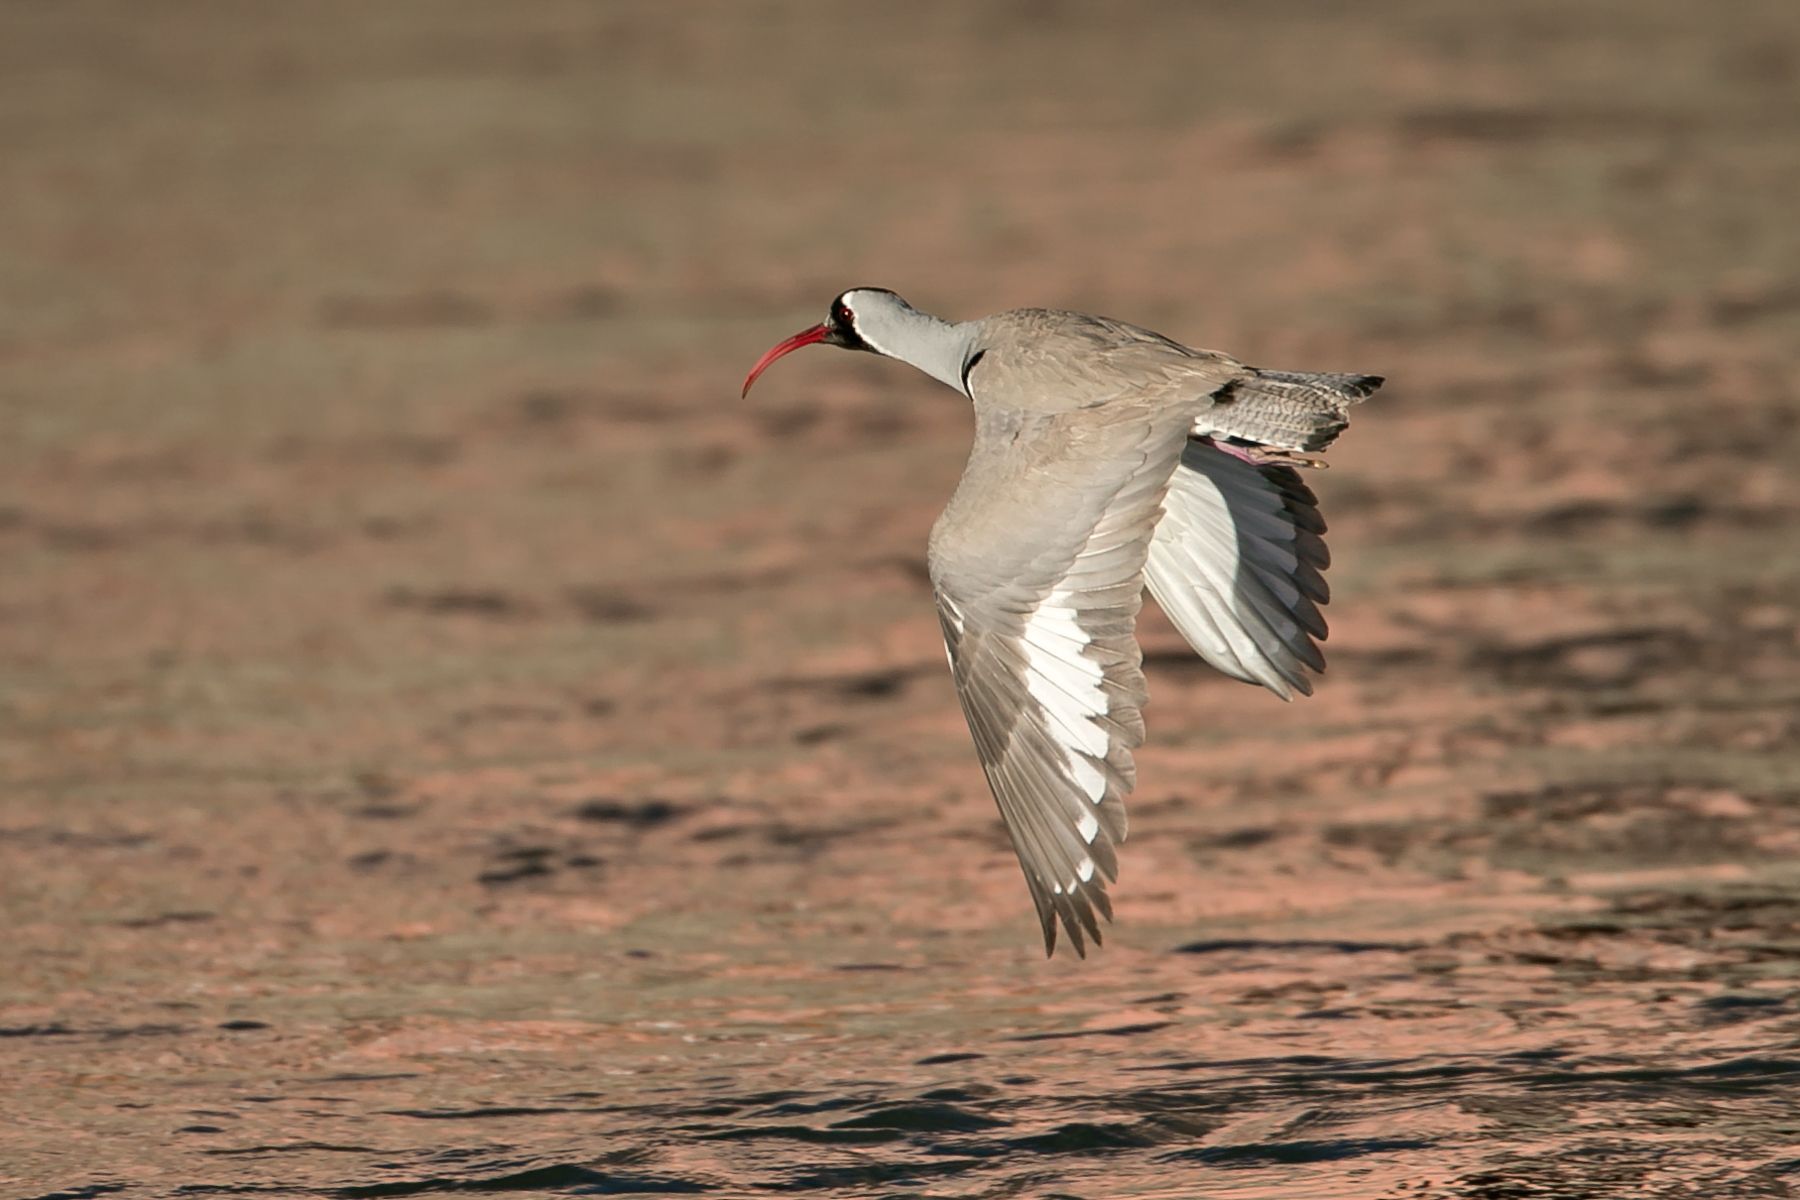 Ibisbill by Mike Watson during a Ladakh photography tour